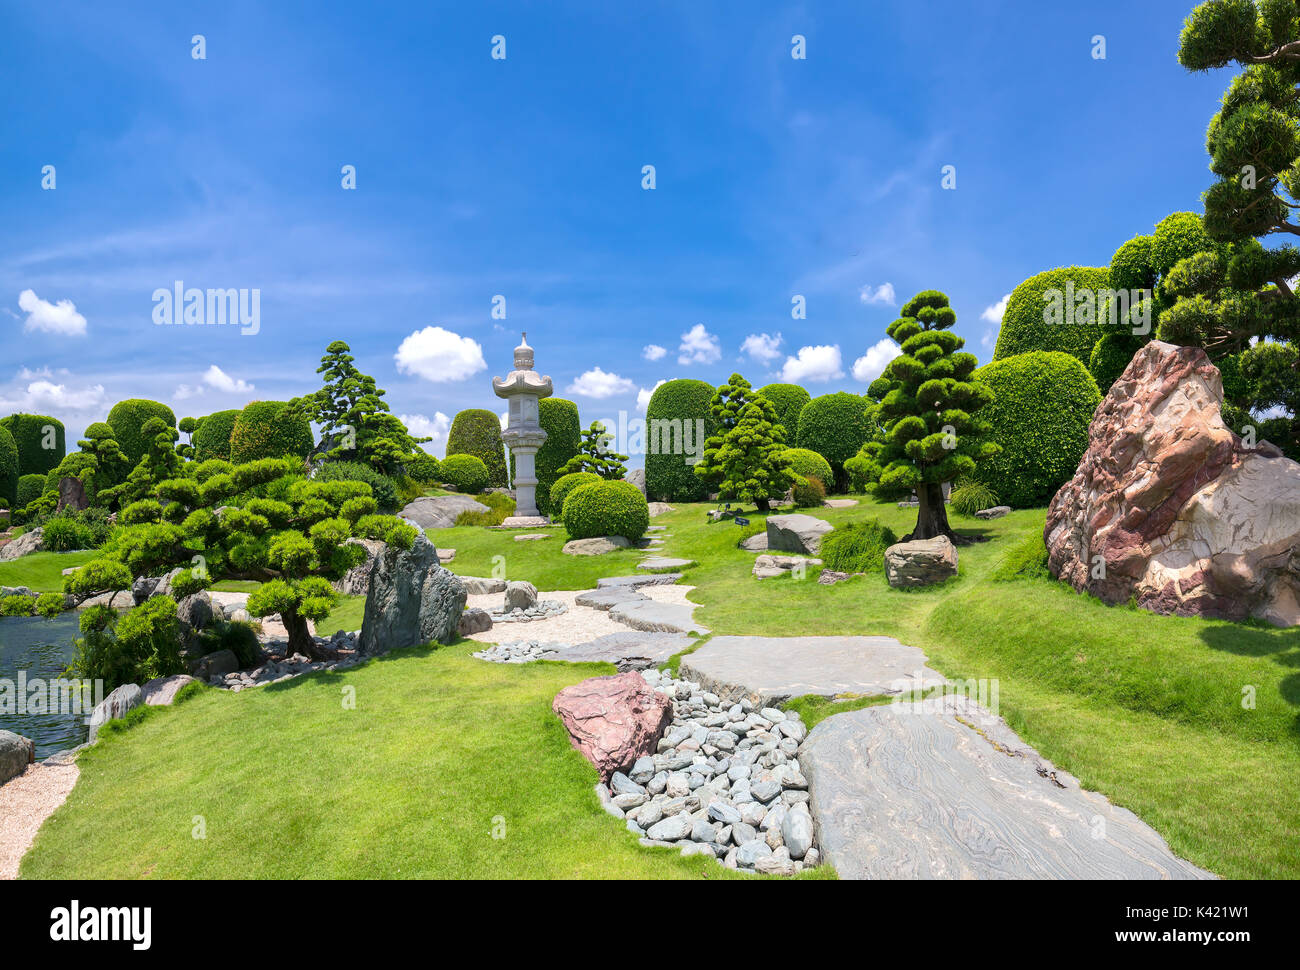 Beautiful garden in ecotourism is designed harmony with cypress, pine, stone and ancient trees bearing traditional culture of traditional Japanese Stock Photo